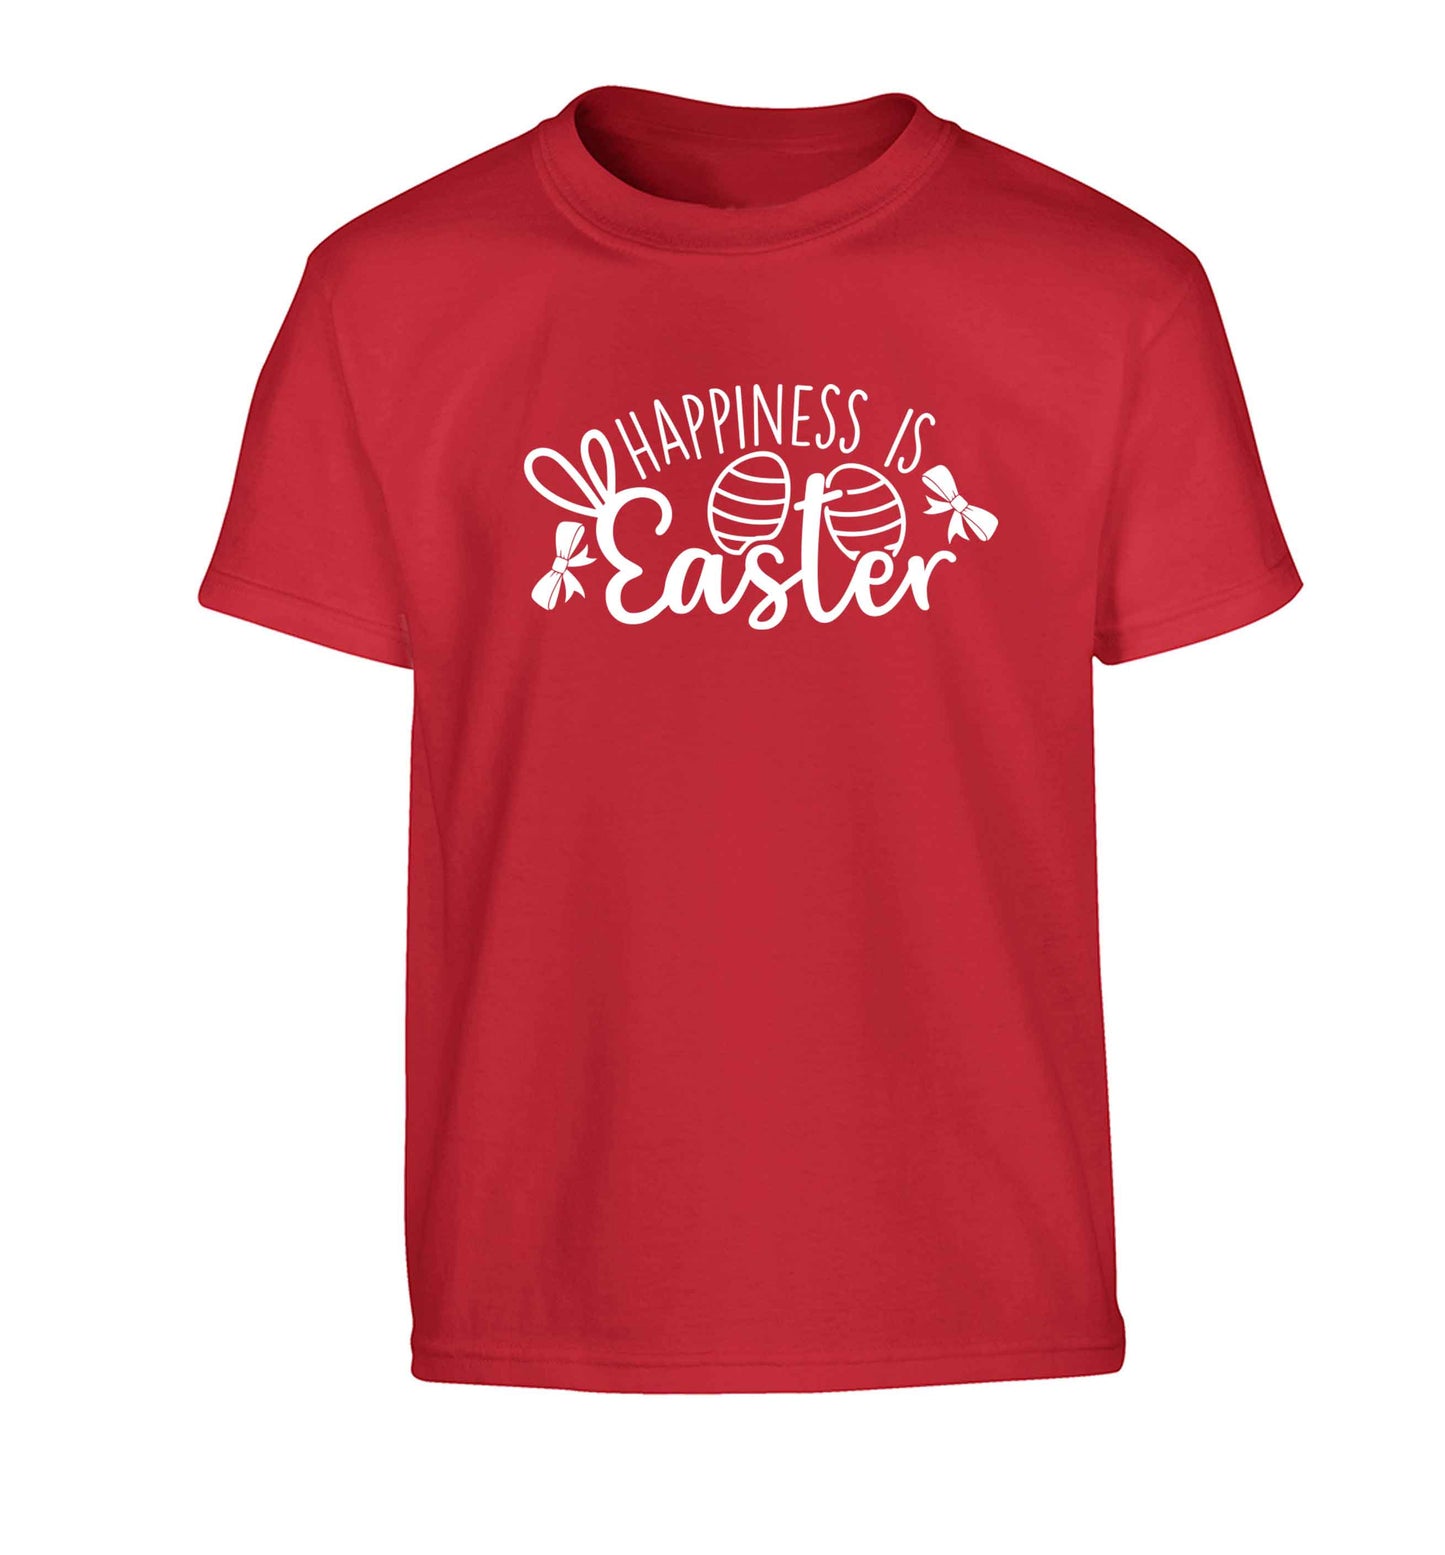 Happiness is easter Children's red Tshirt 12-13 Years